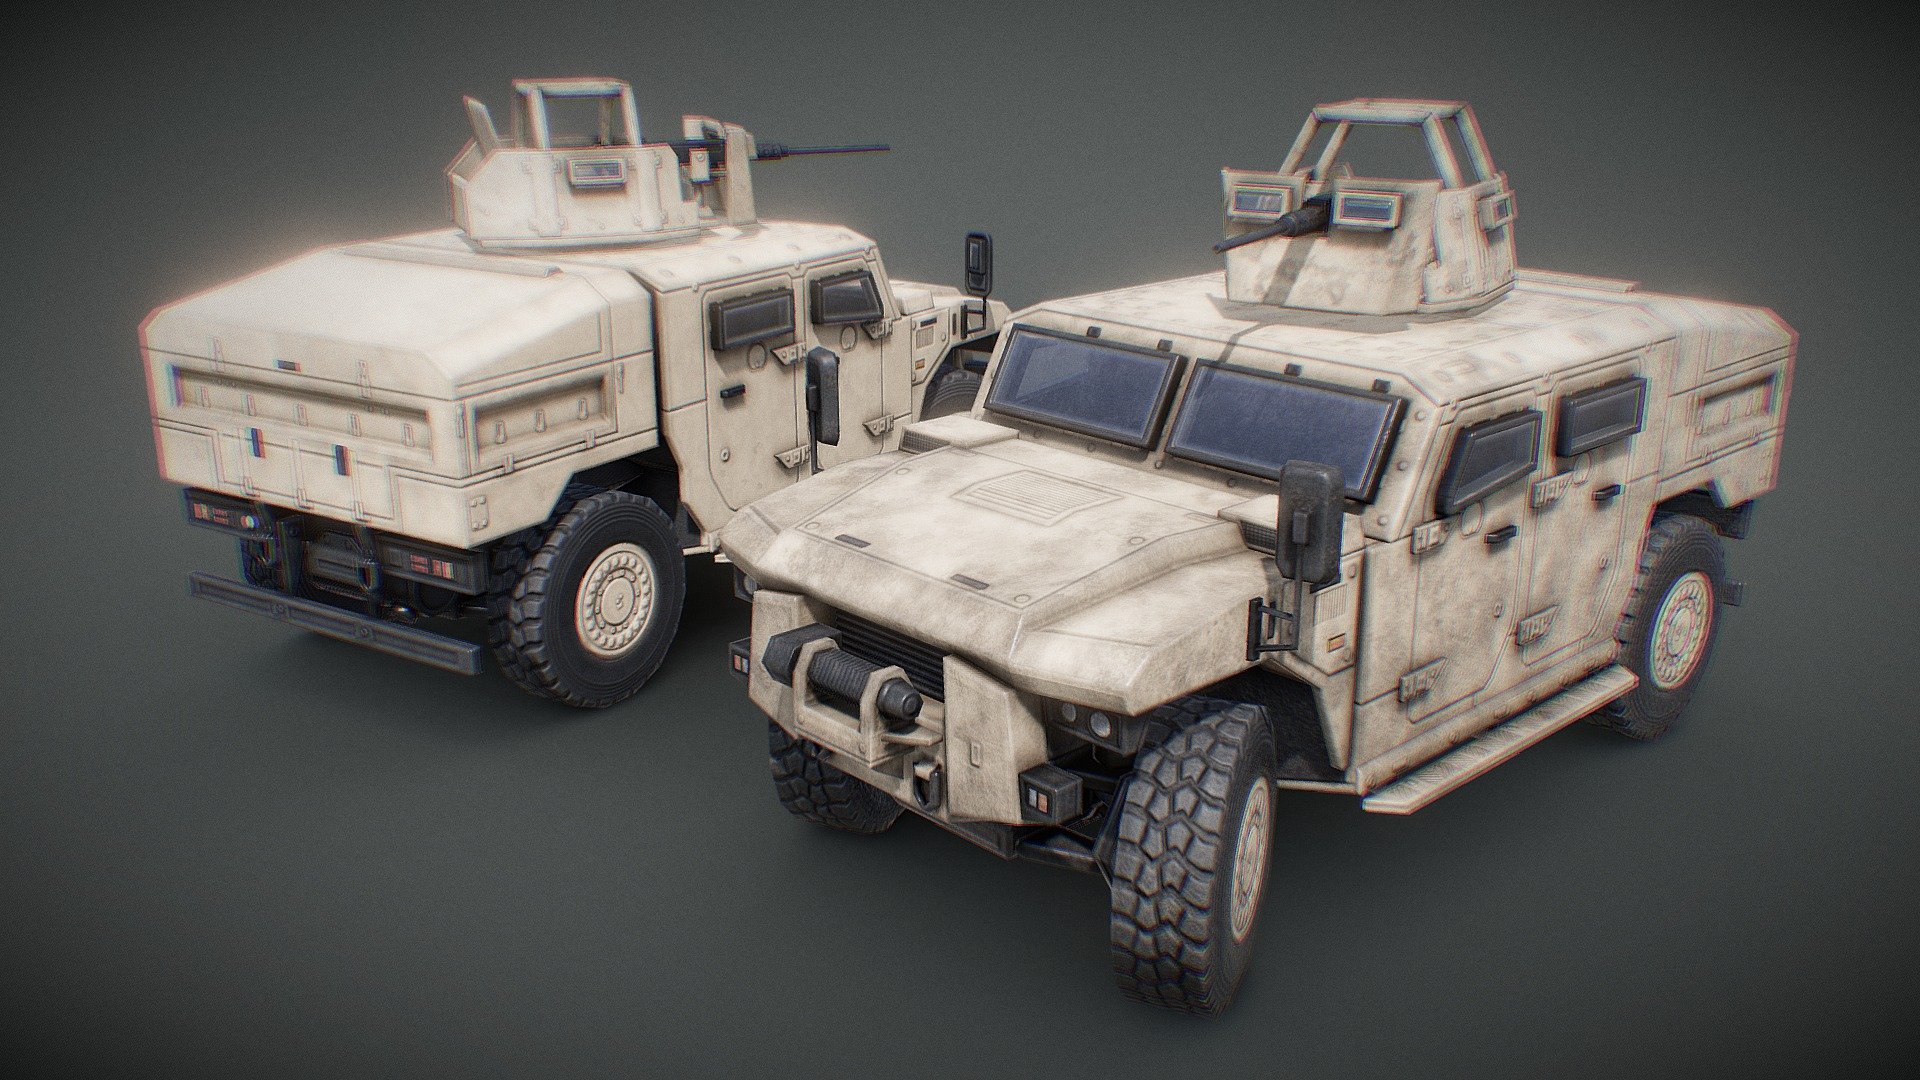 RENAULT SHERPA TOWER M2H2 (DESERT CAMO)
Low-Poly model for the game and VFX

Textures 2048,1024 (Normal,AO,Diffuse,Roughness)
Tris 3,589

https://boosty.to/tsb3dmodels - RENAULT SHERPA TOWER M2H2 (DESERT CAMO) - 3D model by TSB3DMODELS 3d model